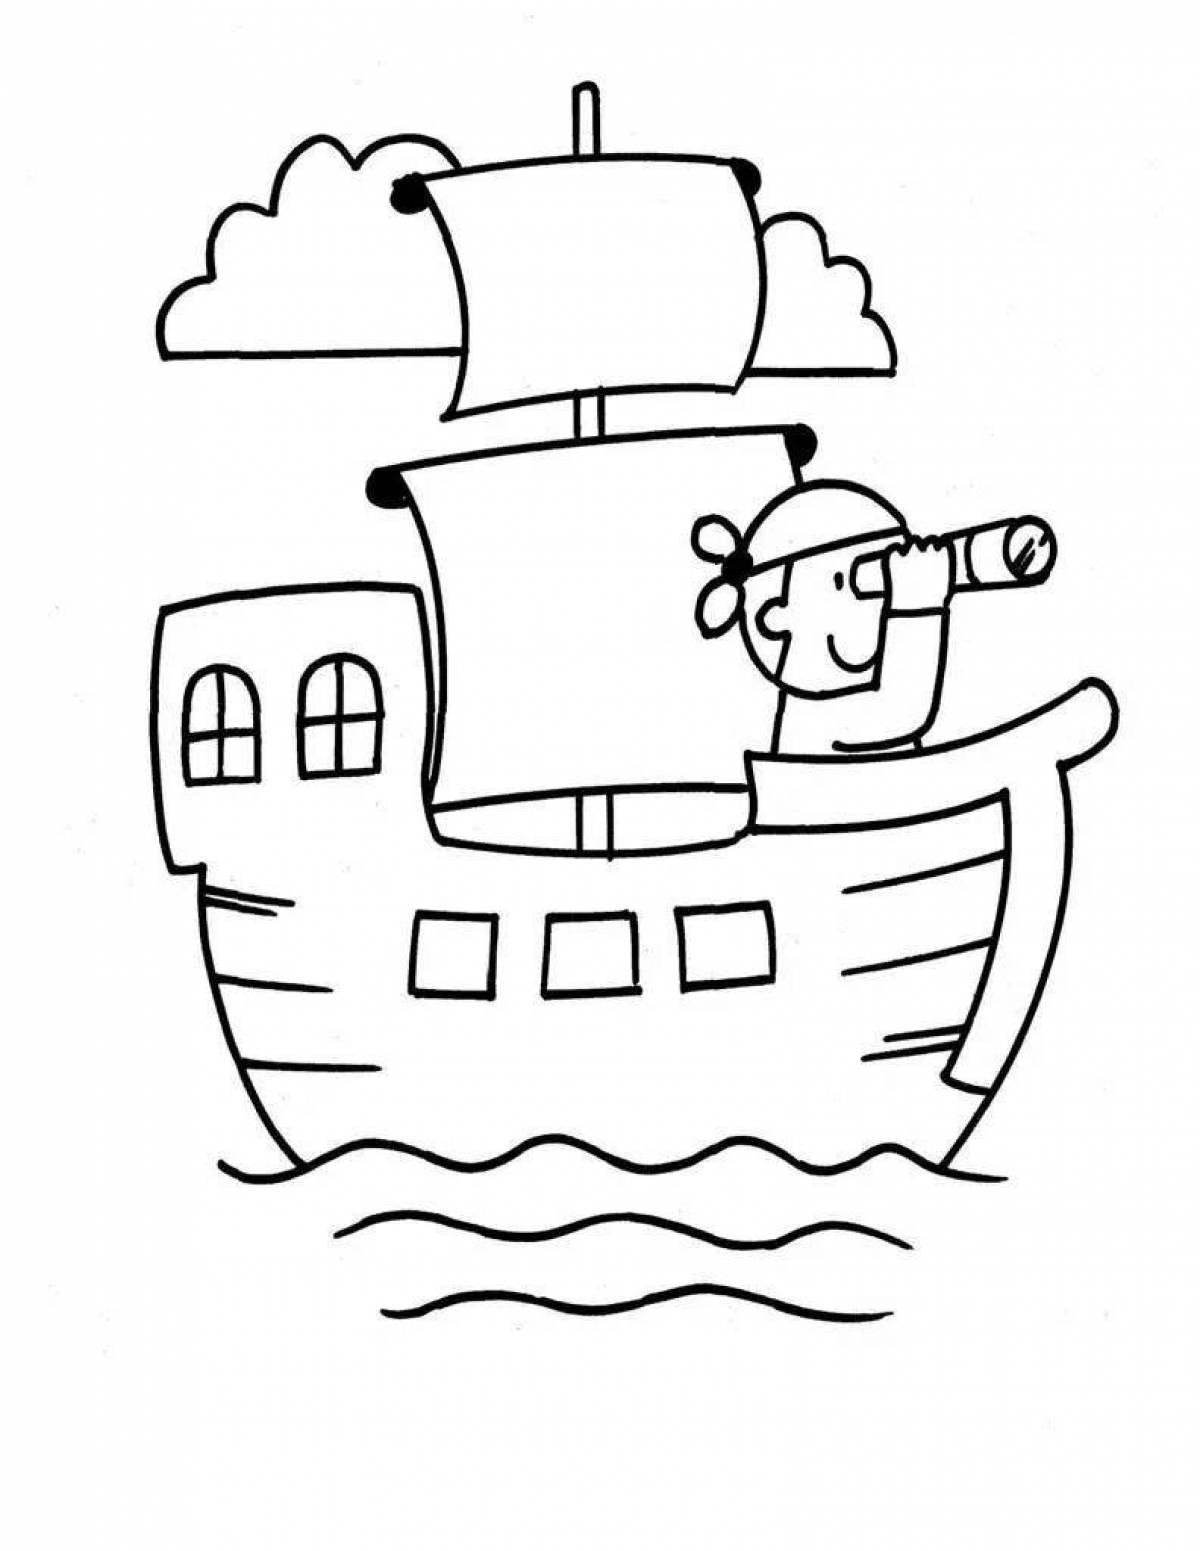 Bright coloring of ships for children